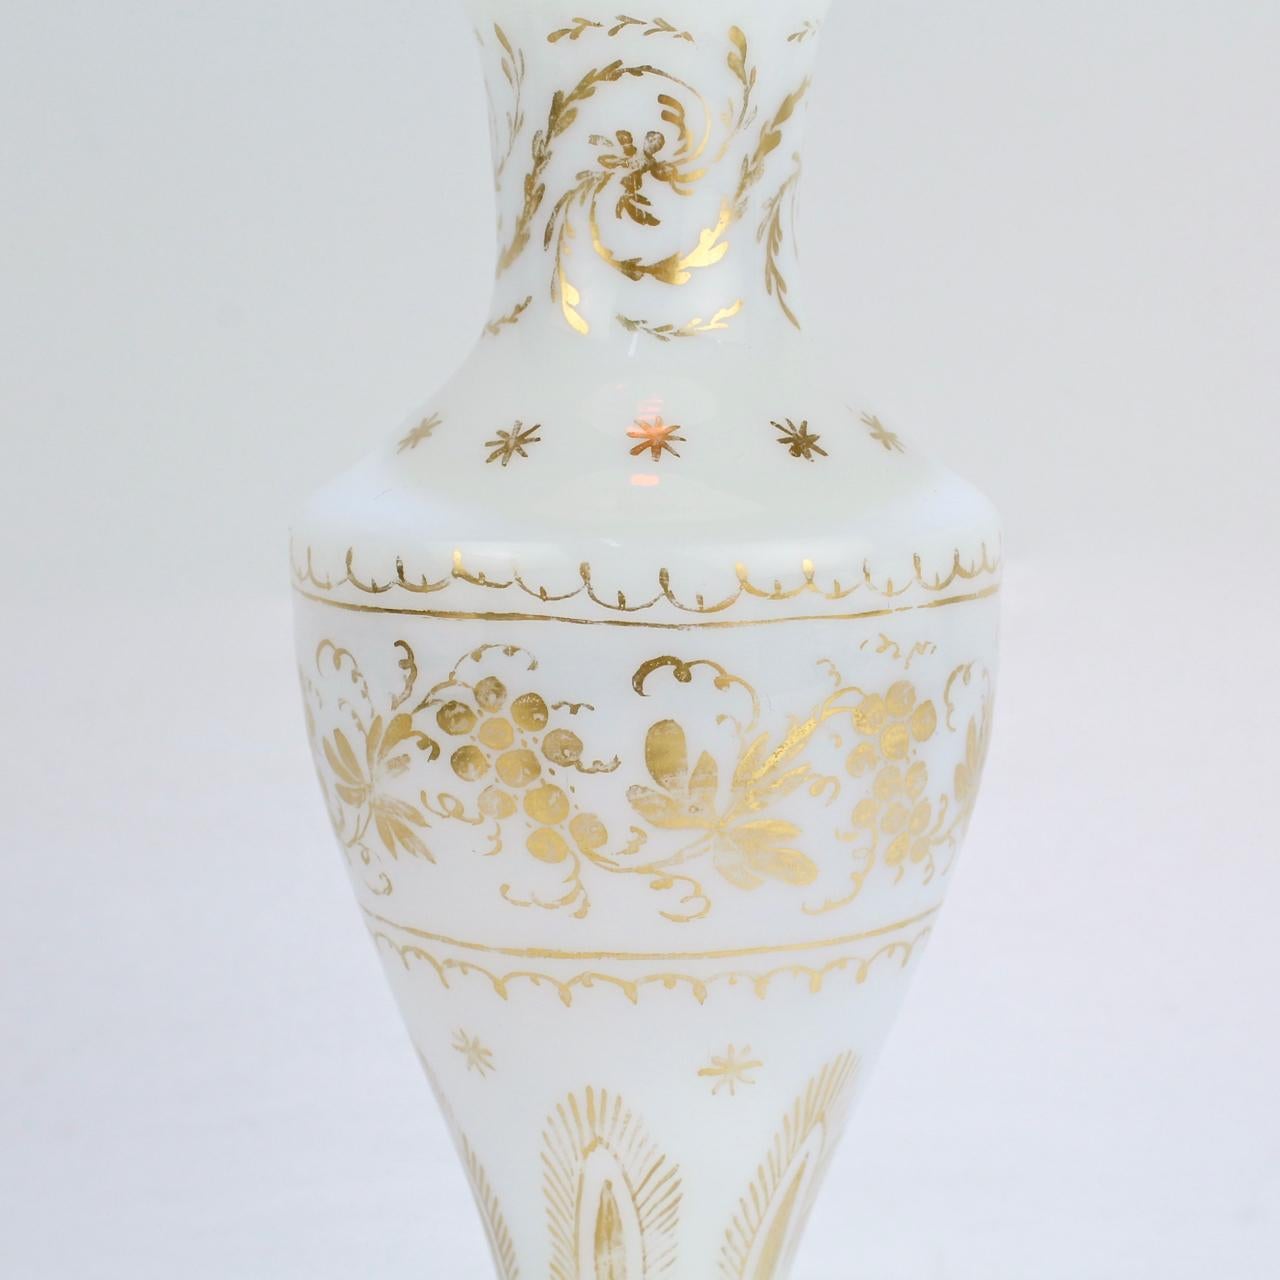 English Antique 18th Century Gilt White Milk Glass Vase in the Manner of James Giles For Sale